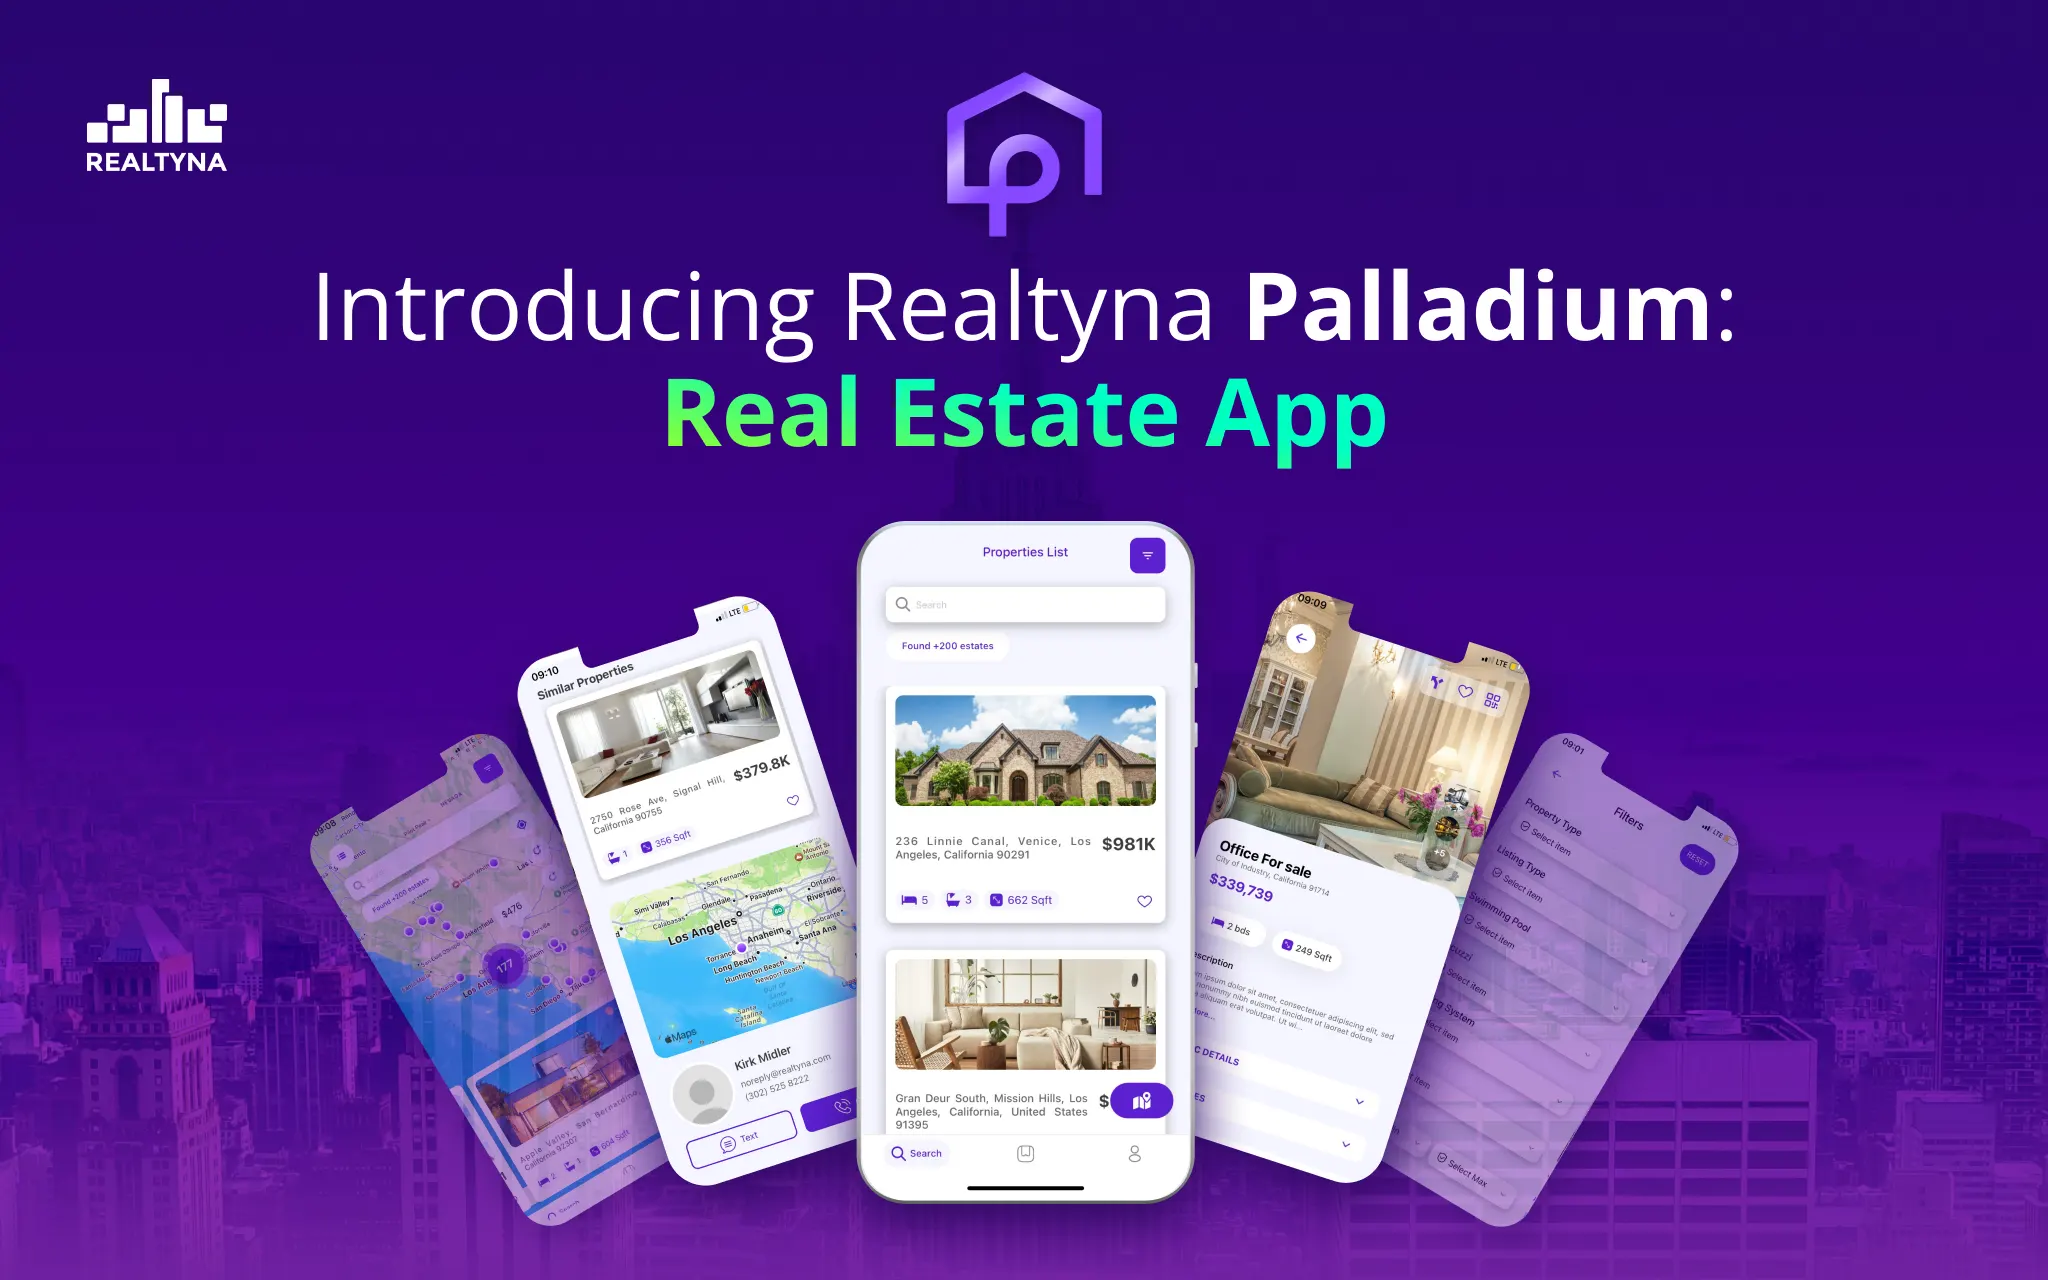 Introducing Realtyna Palladium Real Estate App